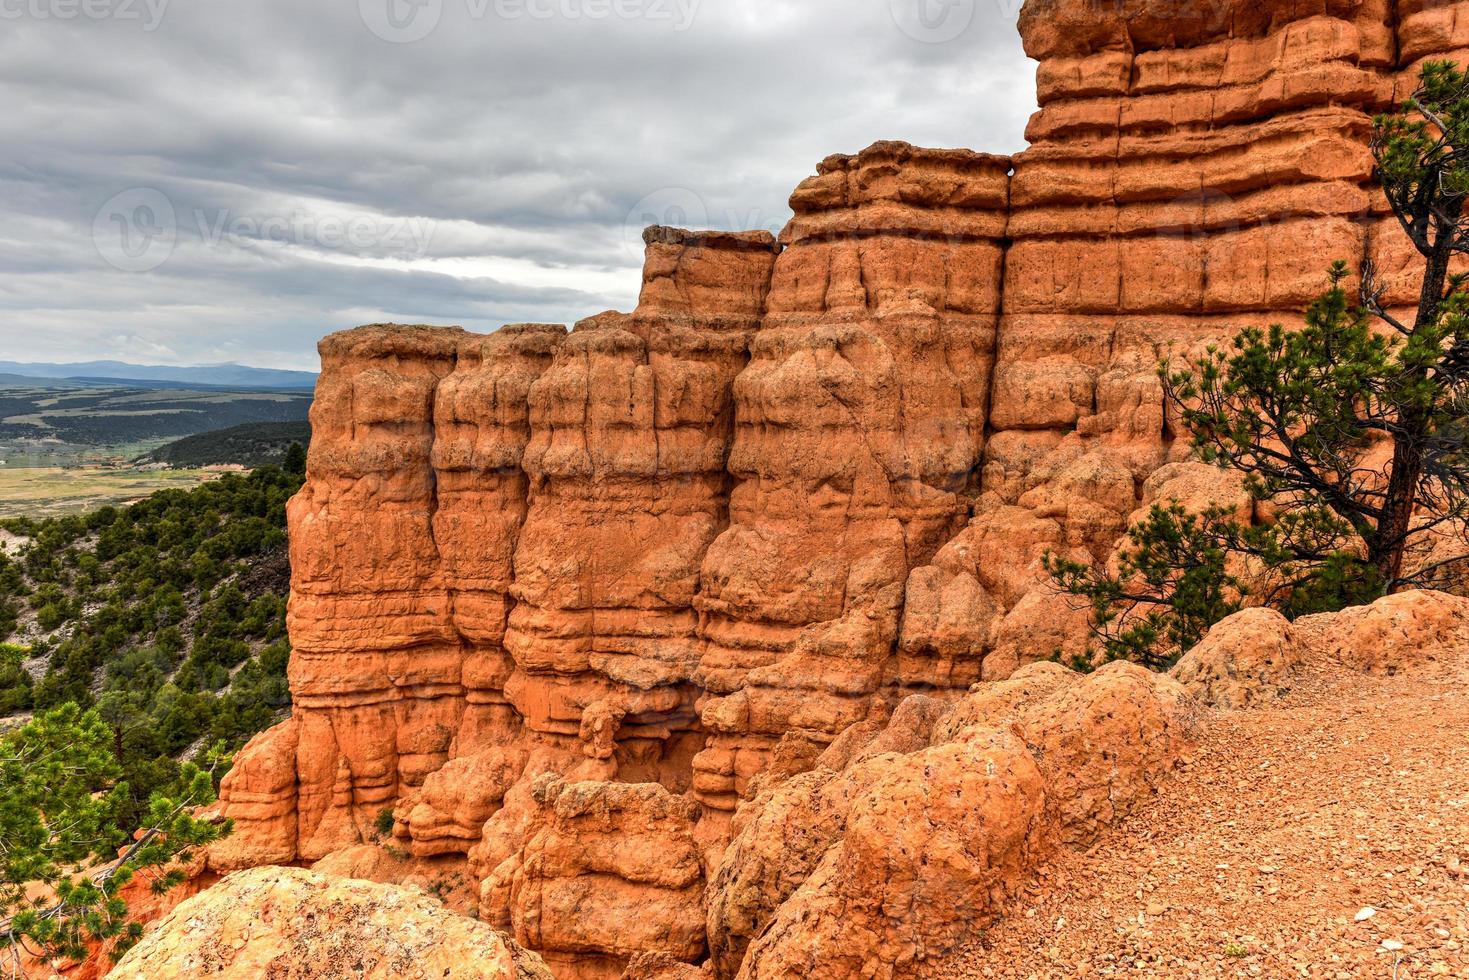 Red Canyon im Dixie National Forest in Utah, Vereinigte Staaten. foto